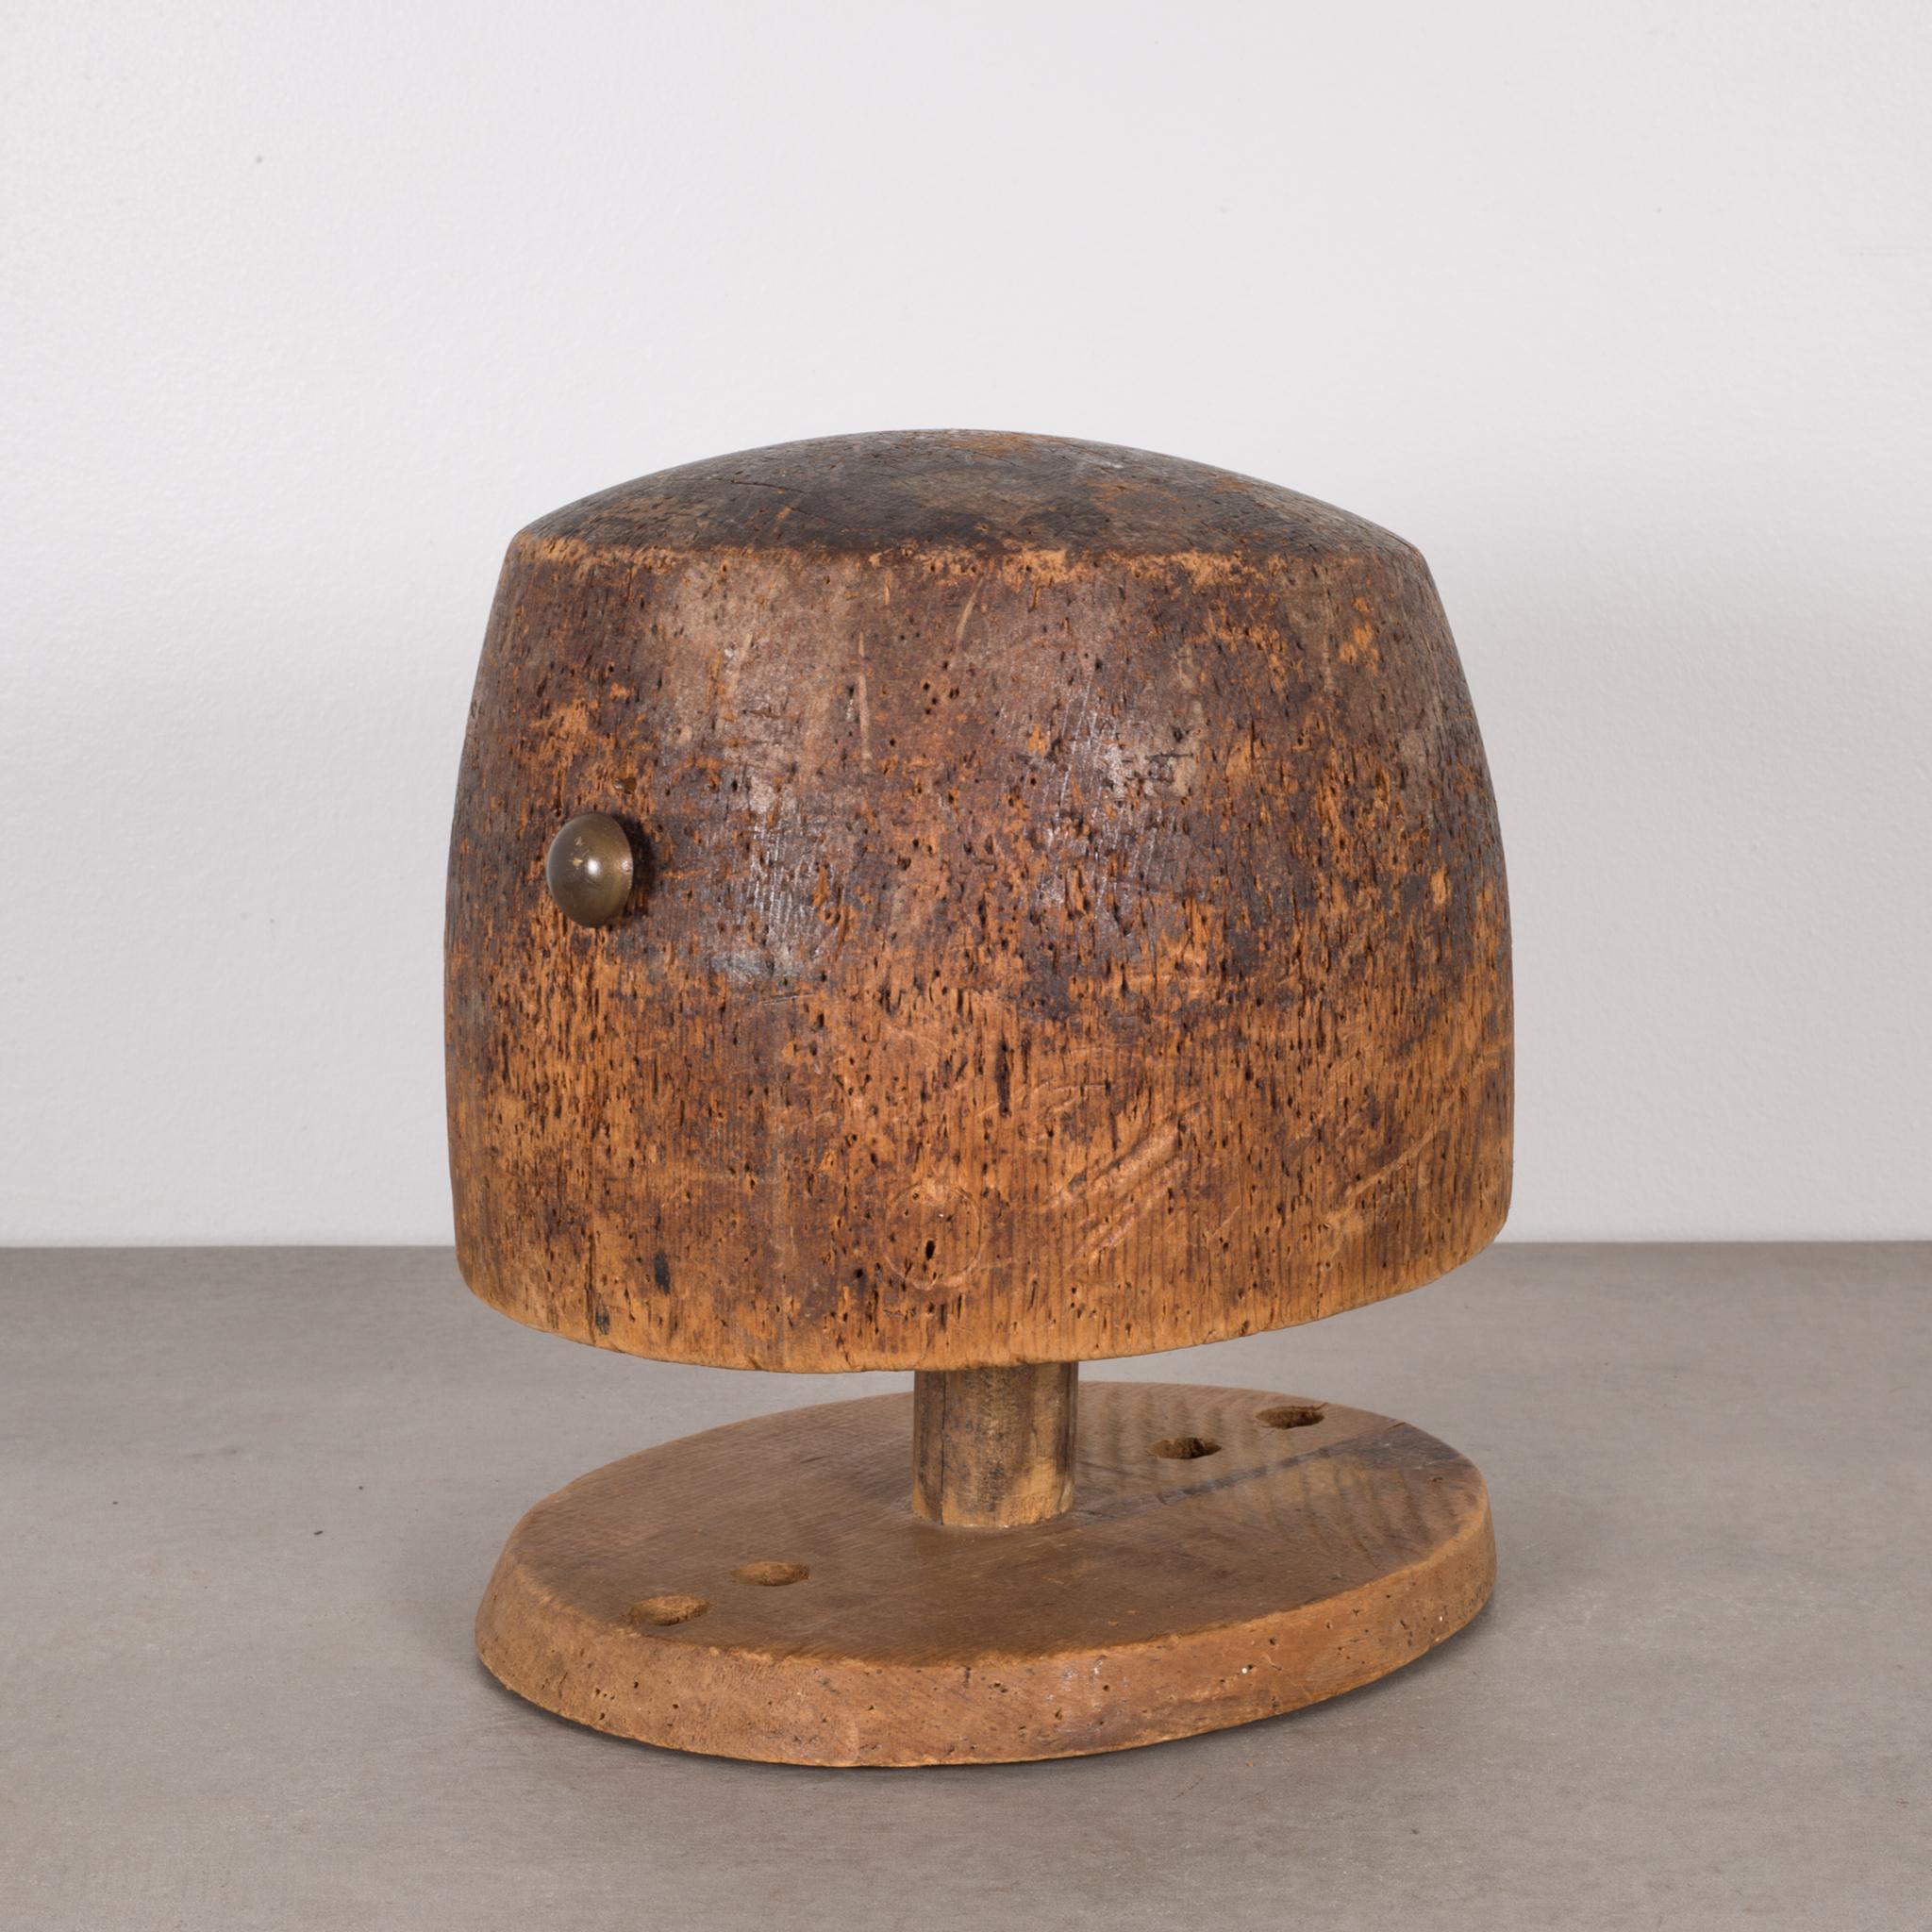 This is an original wooden hat mold/millinery hat mold and is removable from the base. This piece has retained its original finish and has the appropriate patina consistent with age and use.

Creator Unknown.
Date of manufacture circa